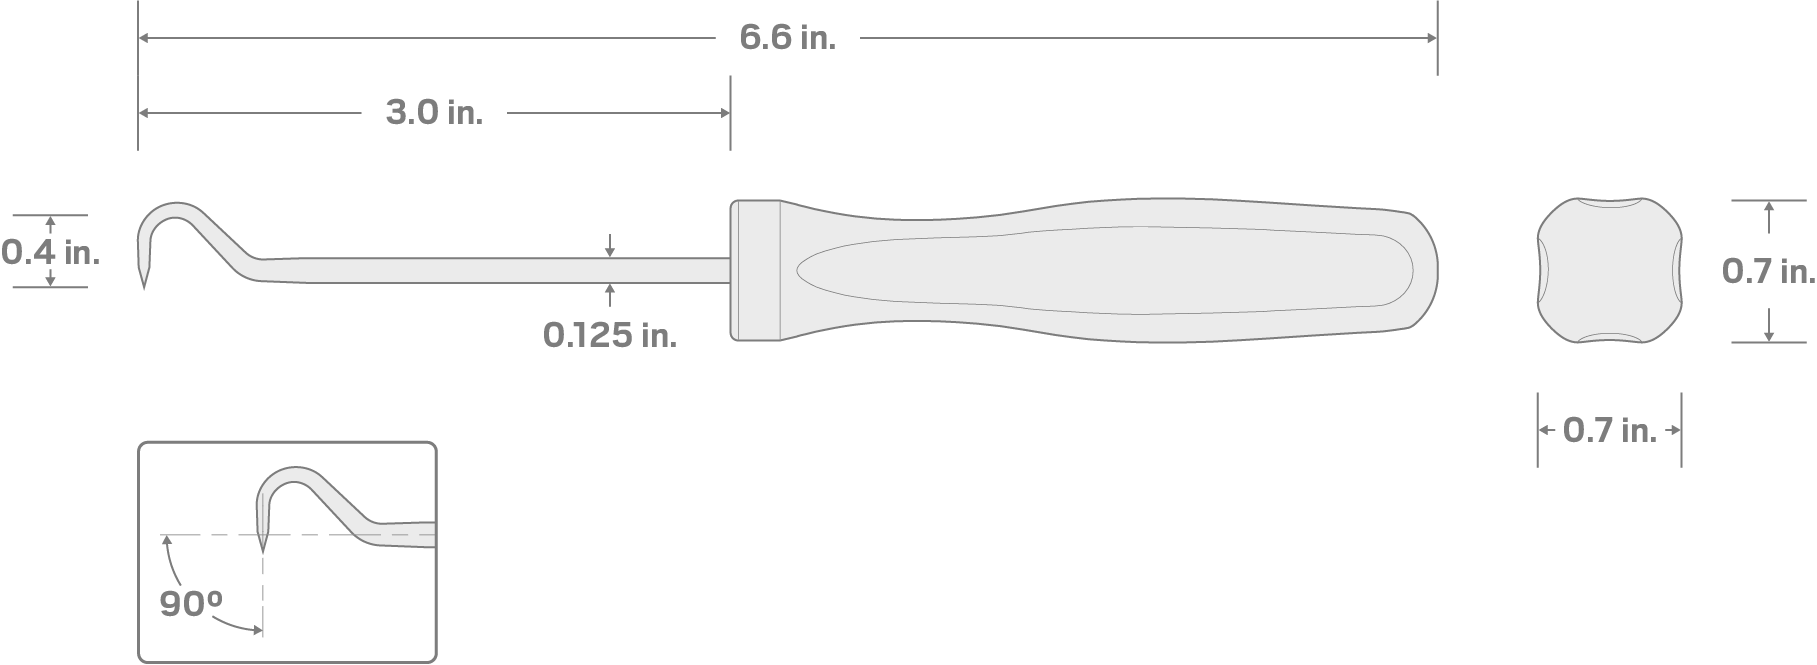 Specs for 90-Degree Hook (1/8 Inch x 3 Inch)